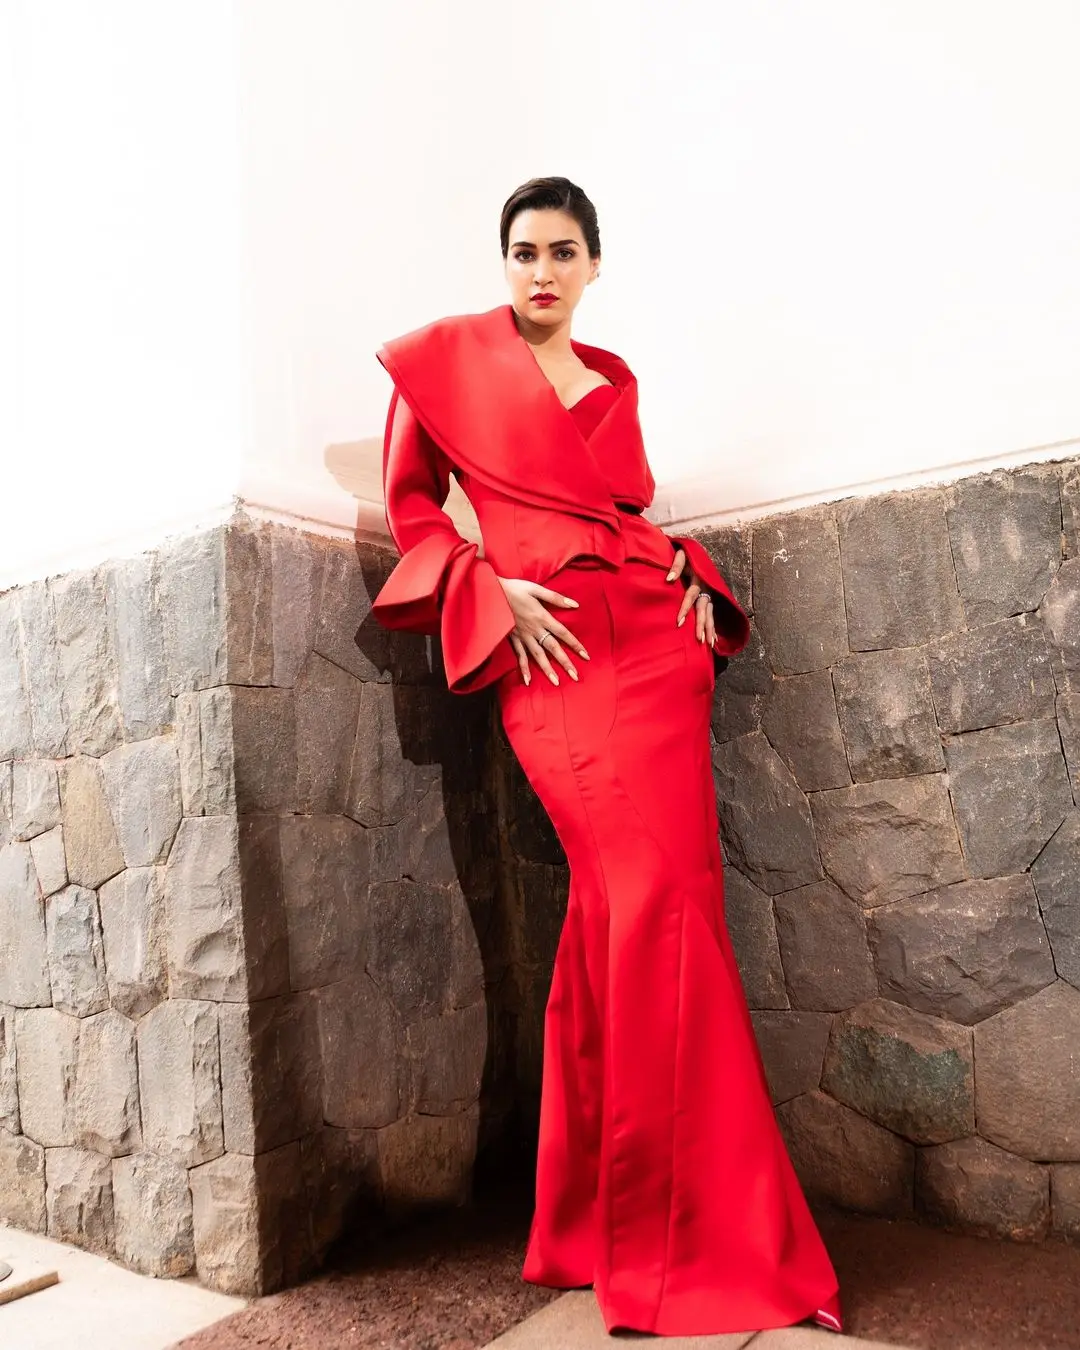 BOLLYWOOD ACTRESS KRITI SANON PHOTOSHOOT IN RED GOWN 2